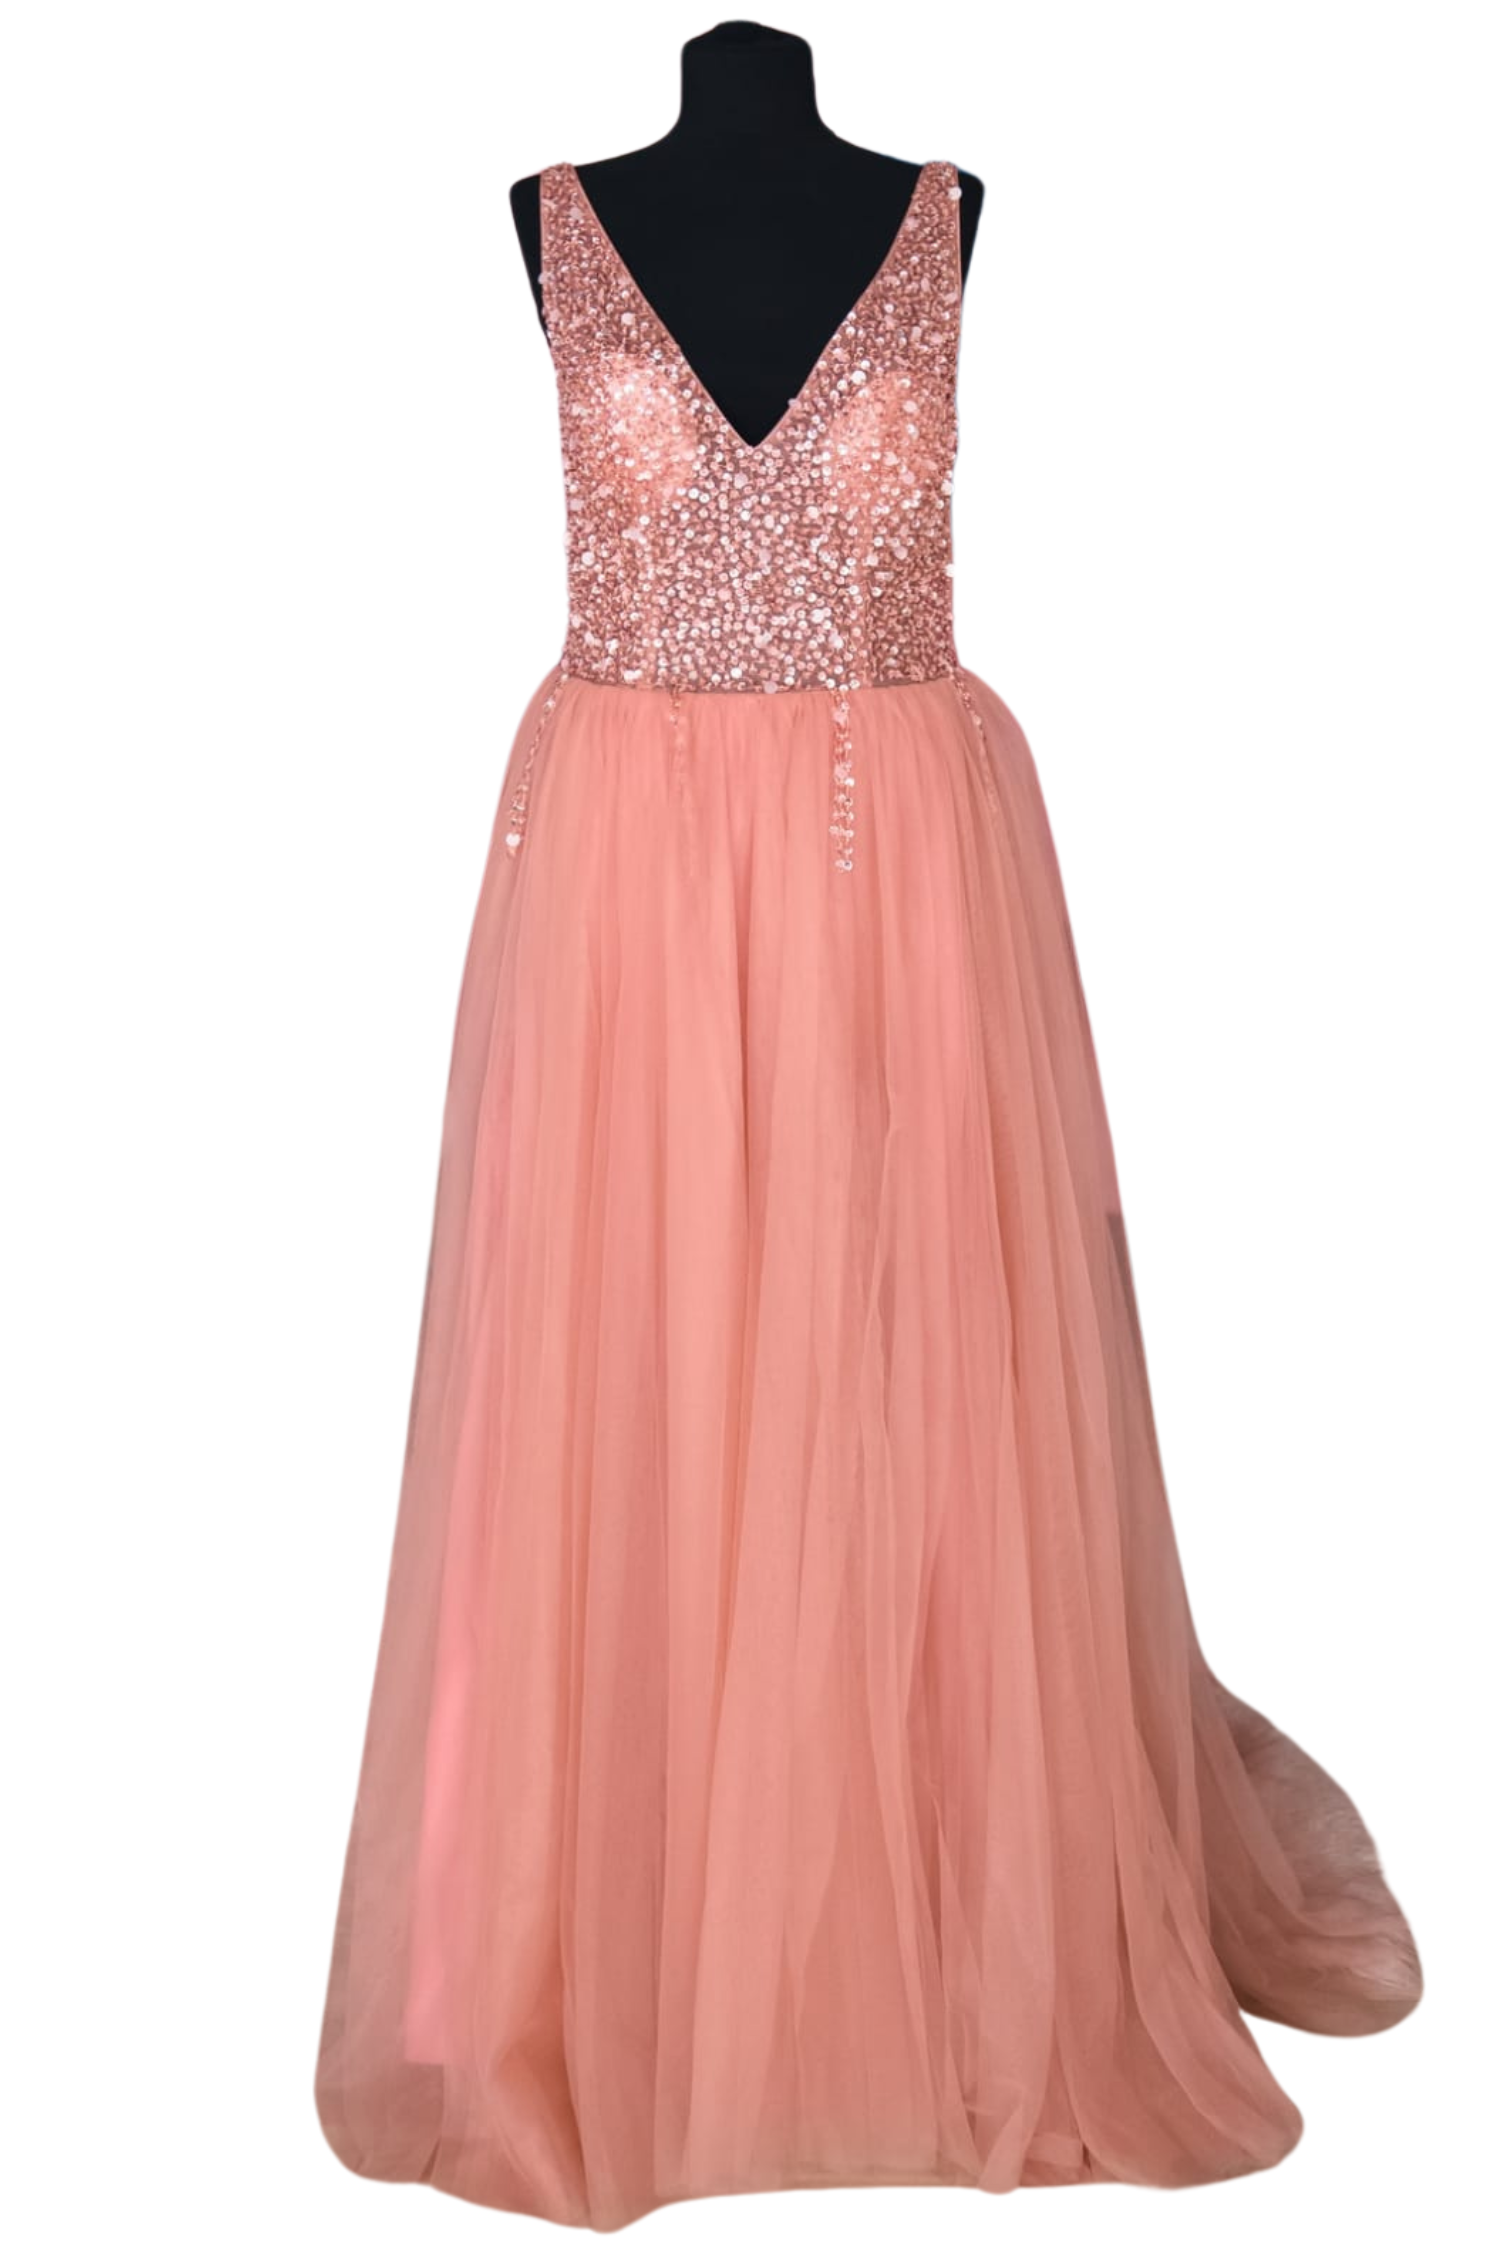 Pink Evening Dress With Beading Sequins-A.A.Y FASHION 